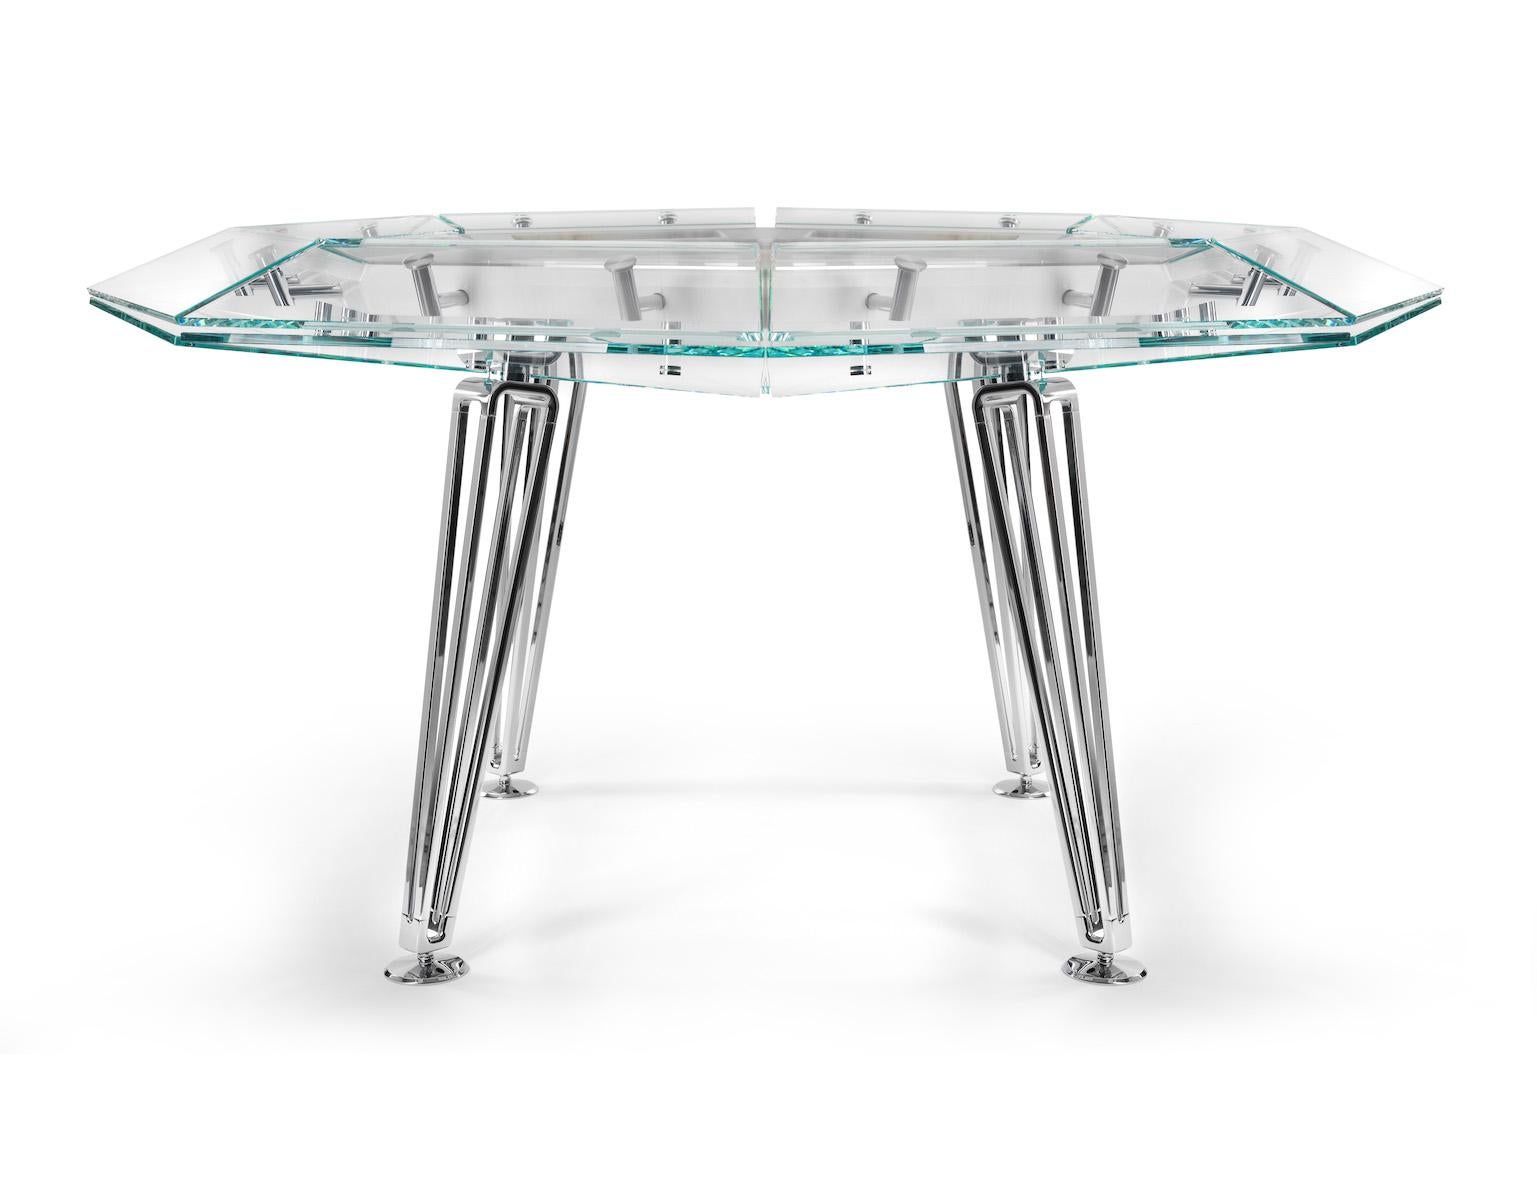 Unootto Marble, 8 Players, Contemporary Design Poker Table by Impatia For Sale 8